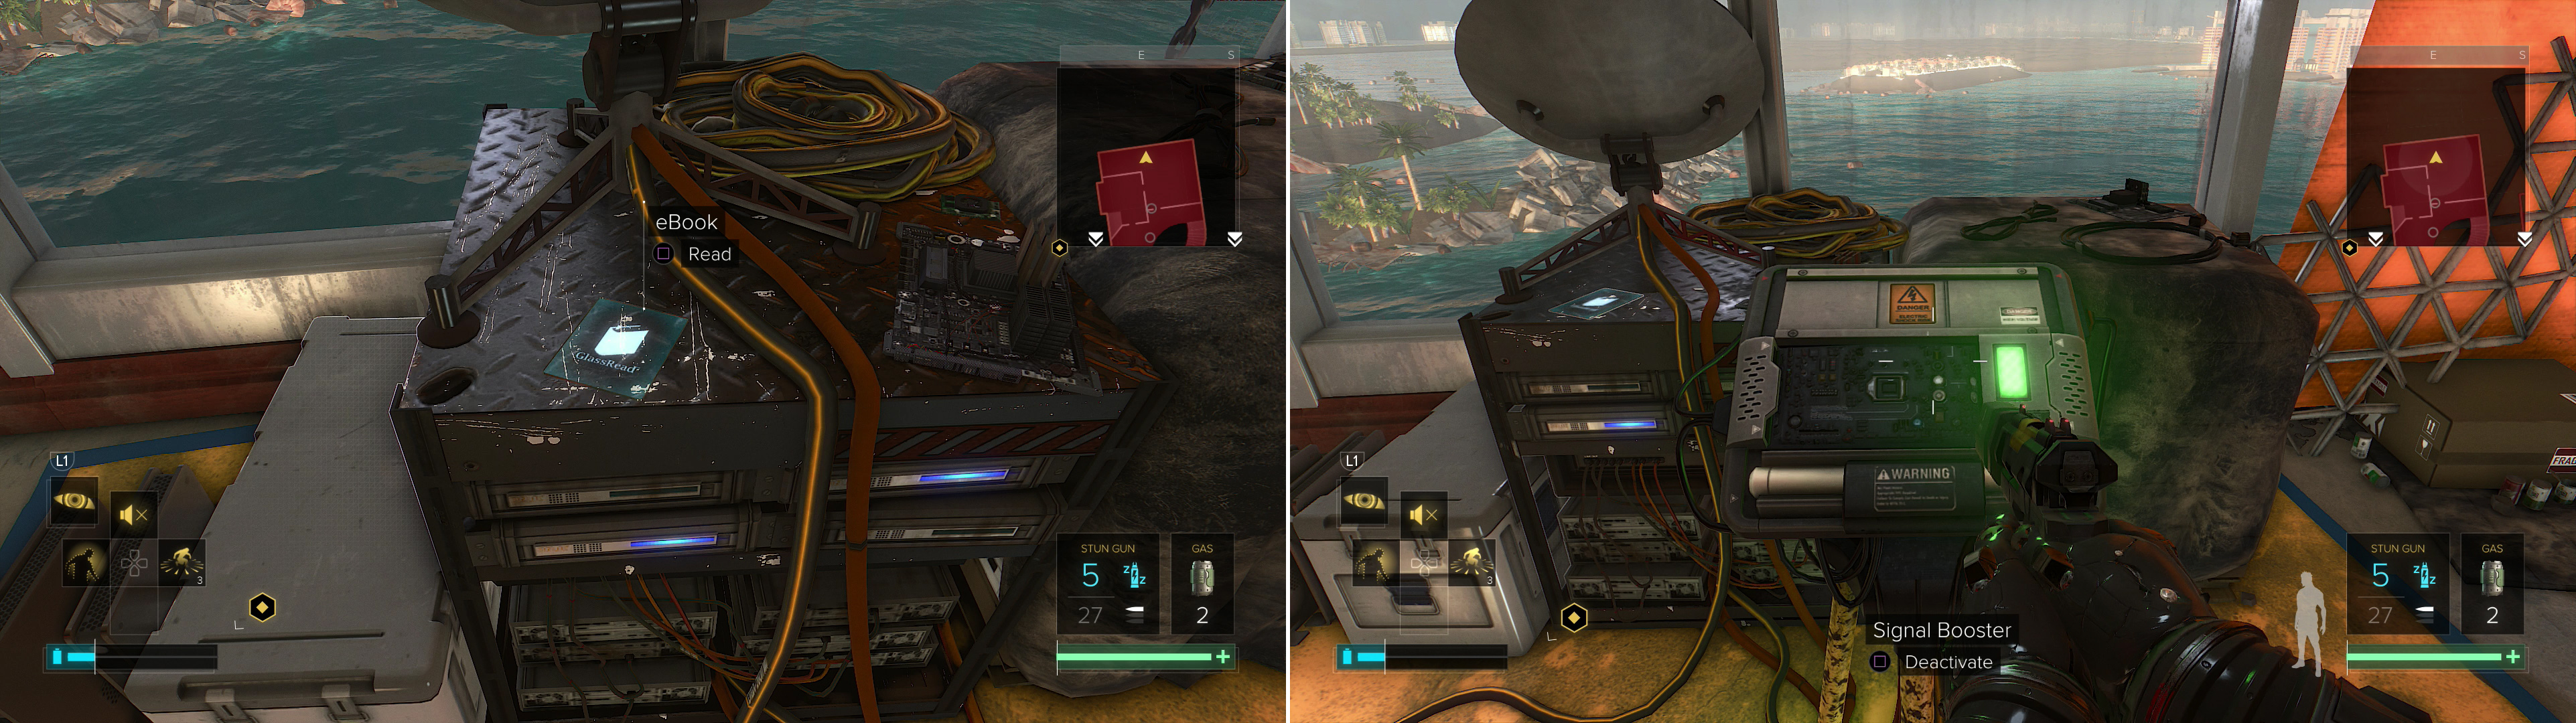 Infiltrate the penthouses to find an eBook (left) and the Signal Booster (right).